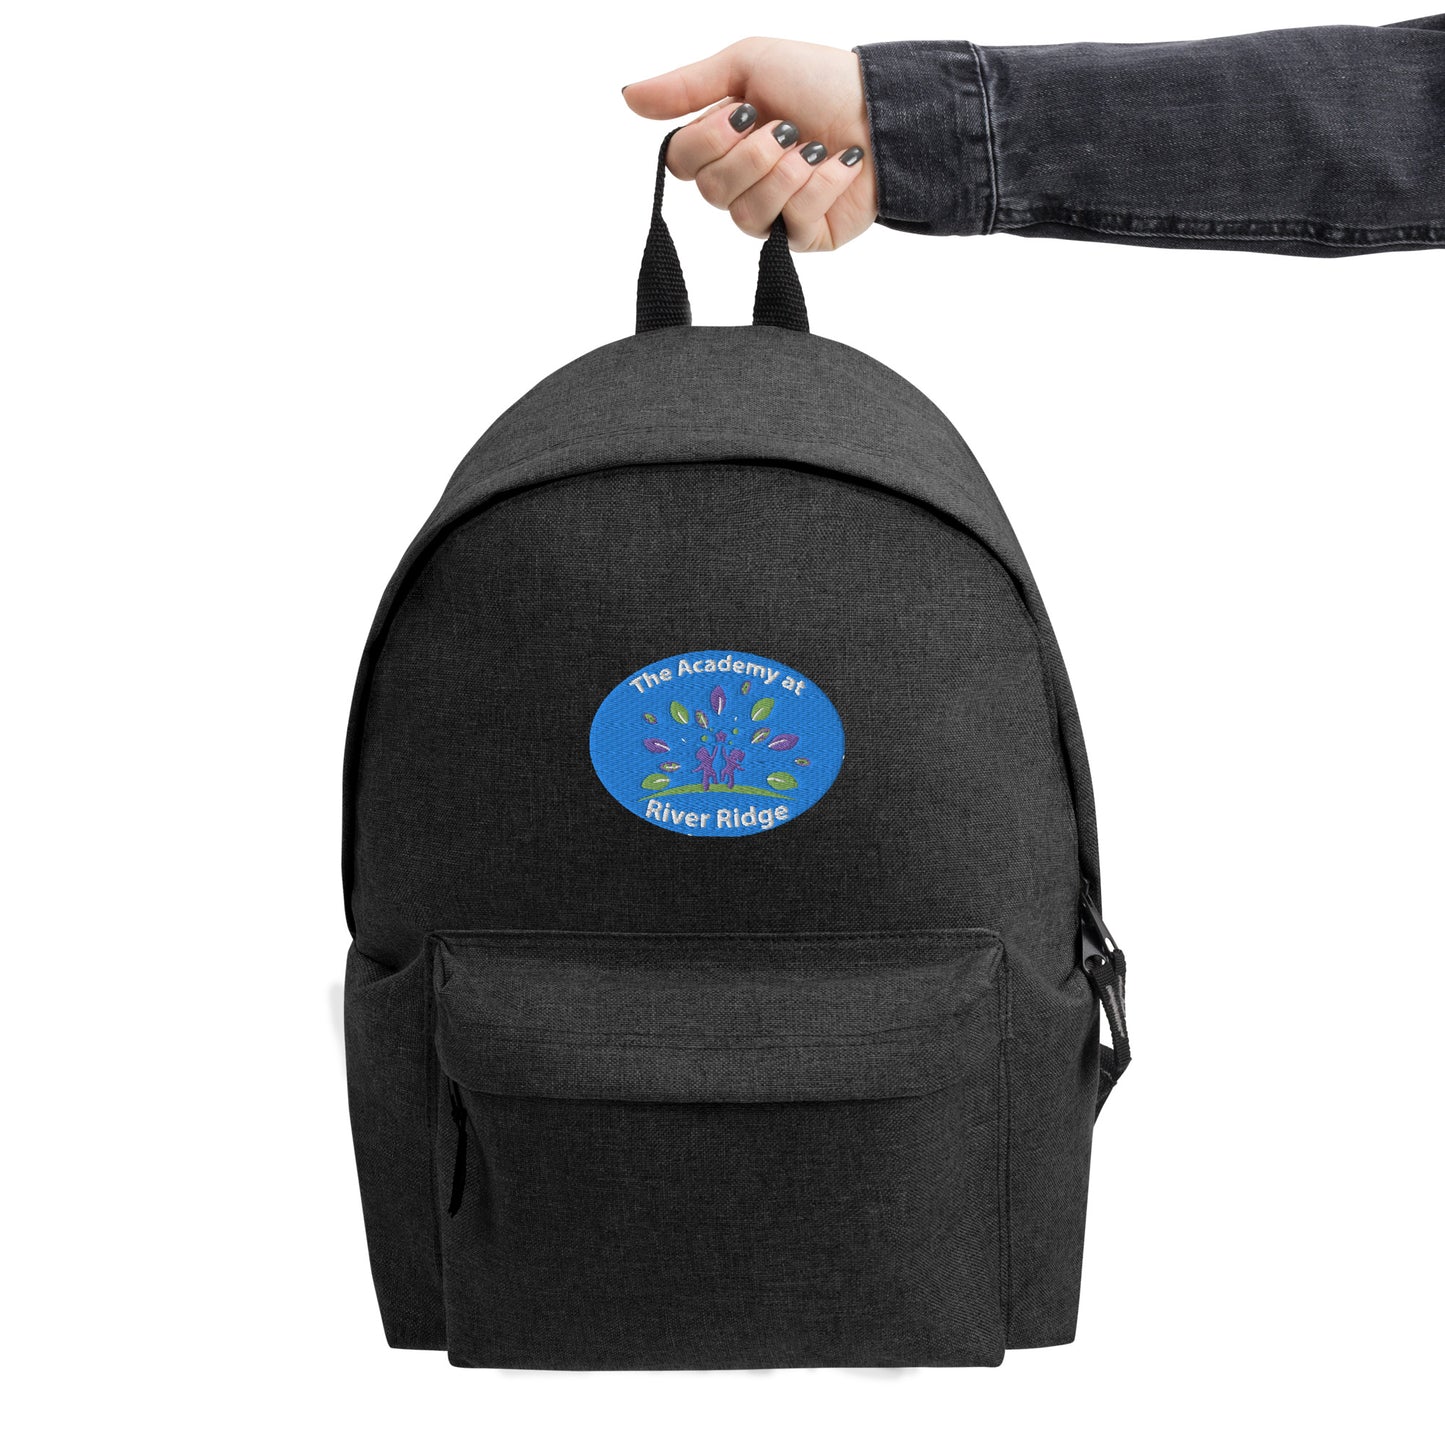 River Ridge Embroidered Backpack